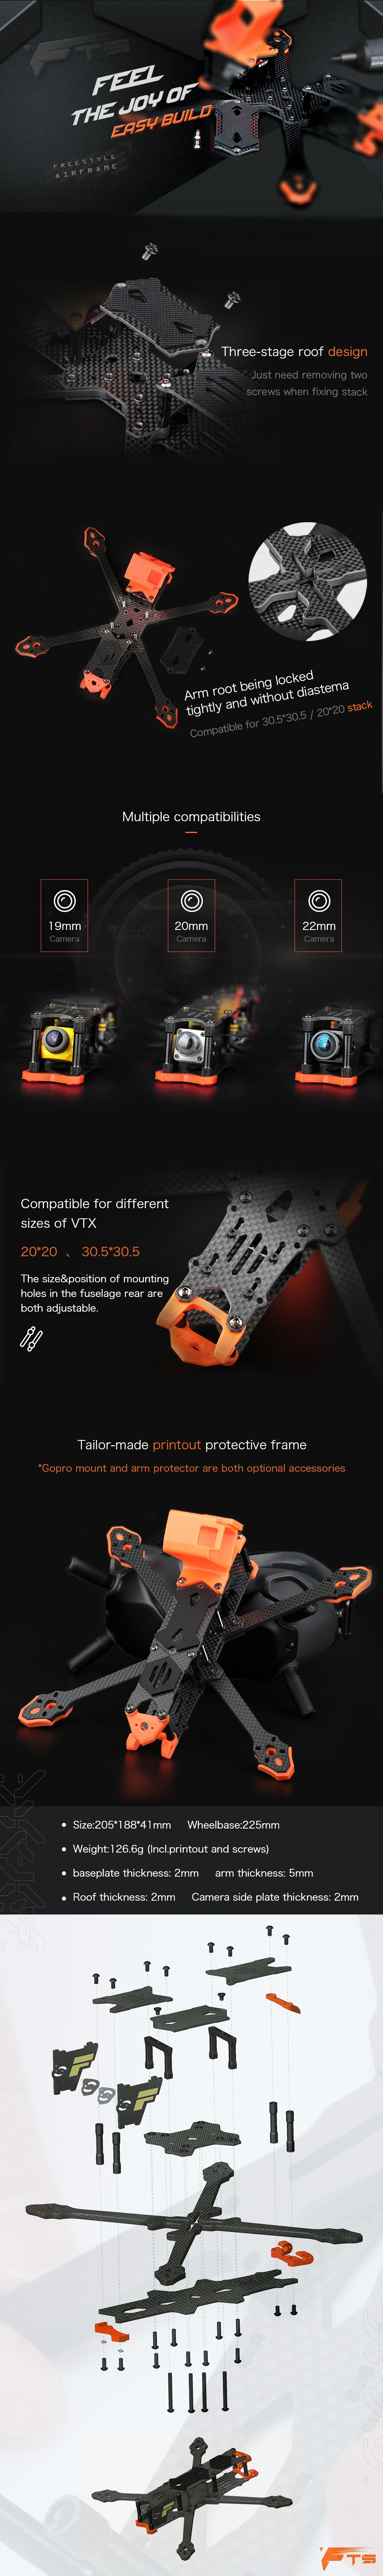 T-Motor FT5 225mm 3K Carbon Fiber 5 Inch Frame Kit Support 20x20mm & 30.5x30.5mm Stack for RC Drone FPV Racing